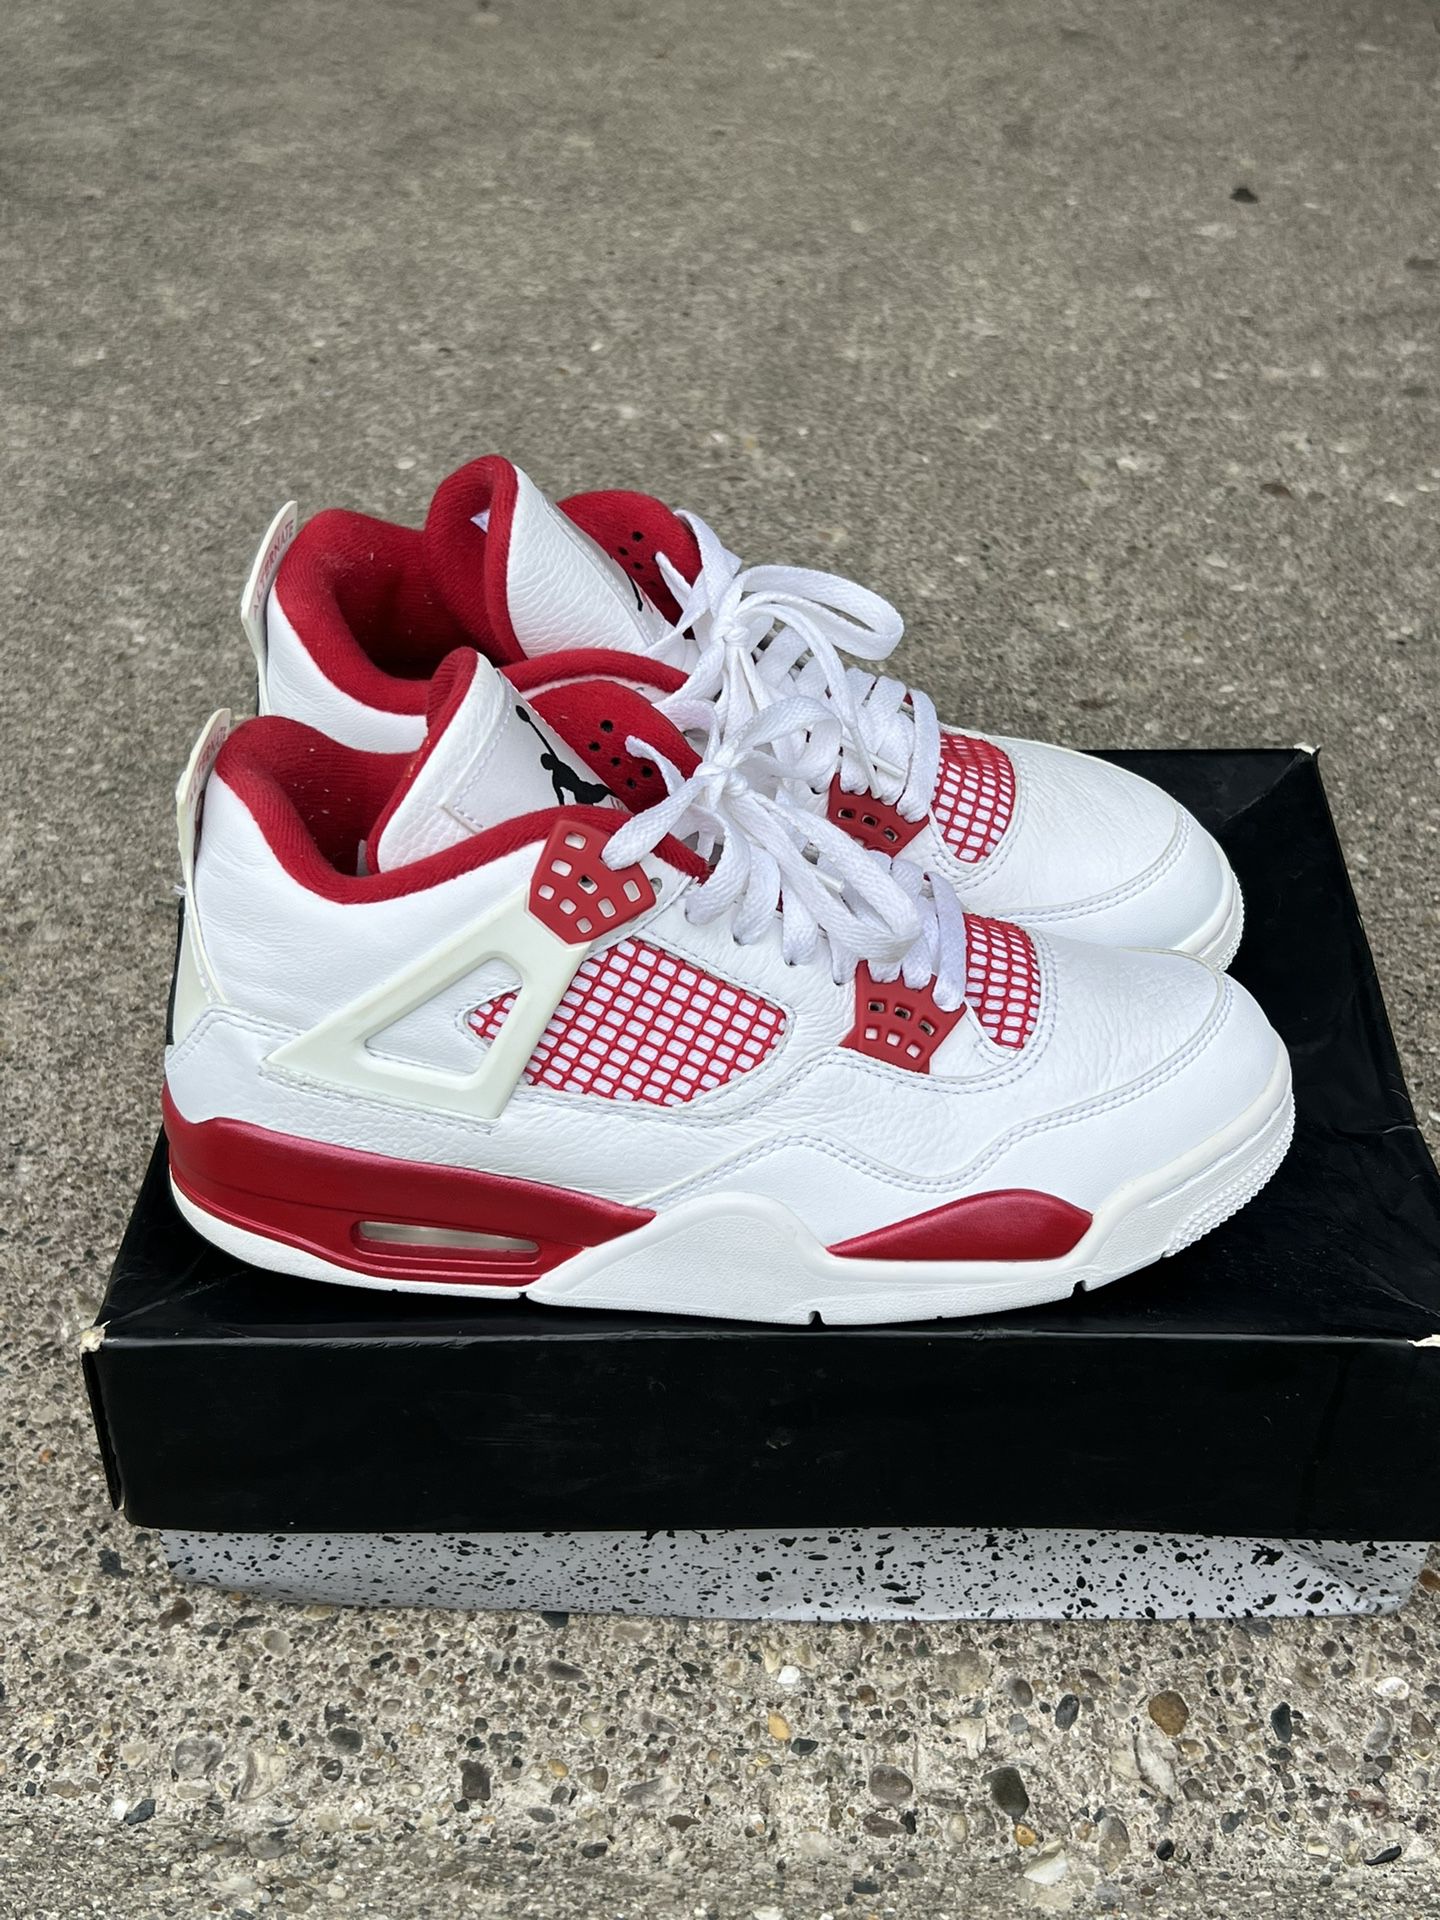 Retro 4’s Purchased In 2015 